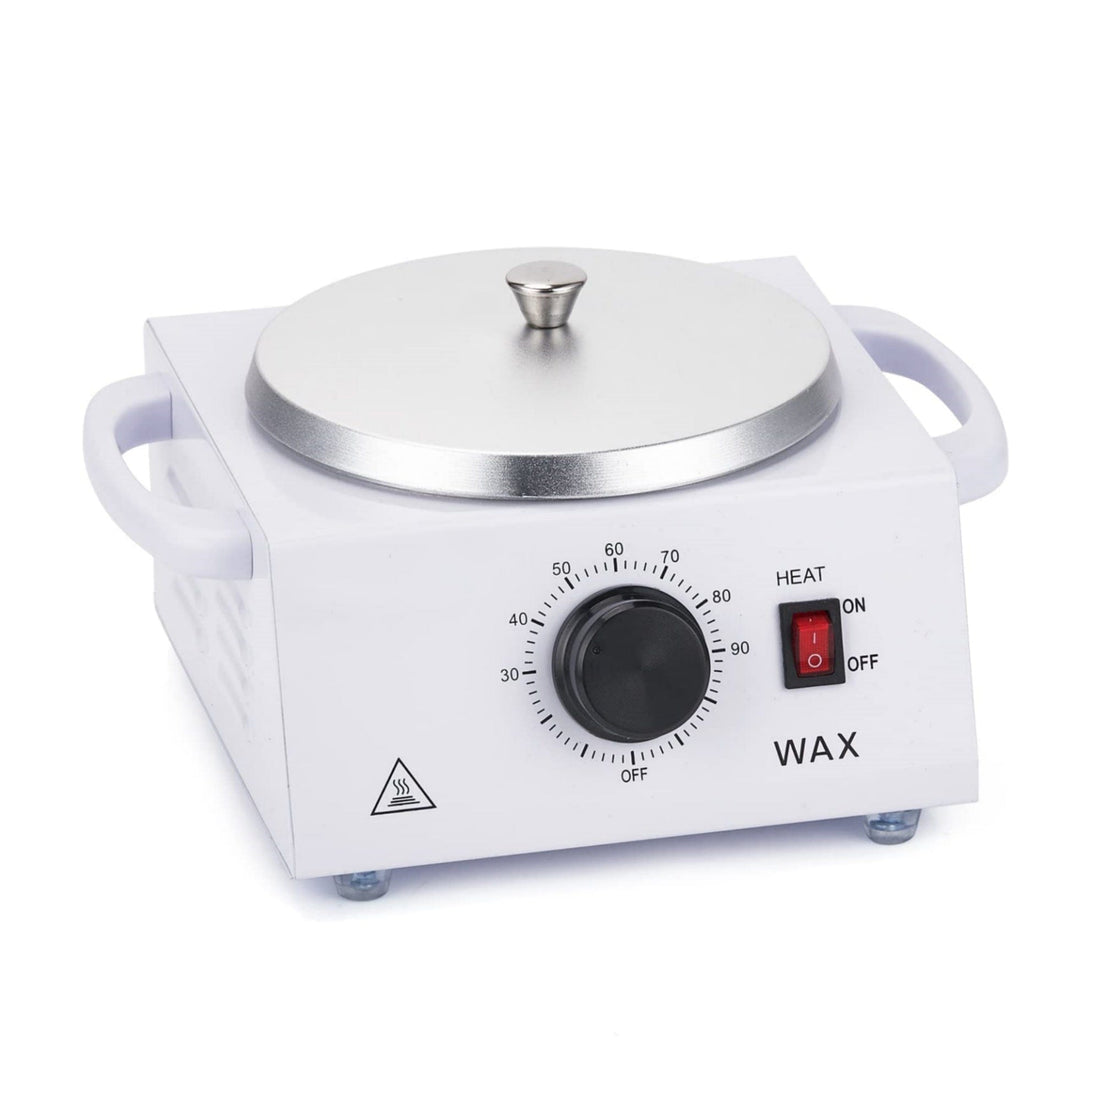 Professional Single Pot Wax Warmer Kit for All Hair Types, White